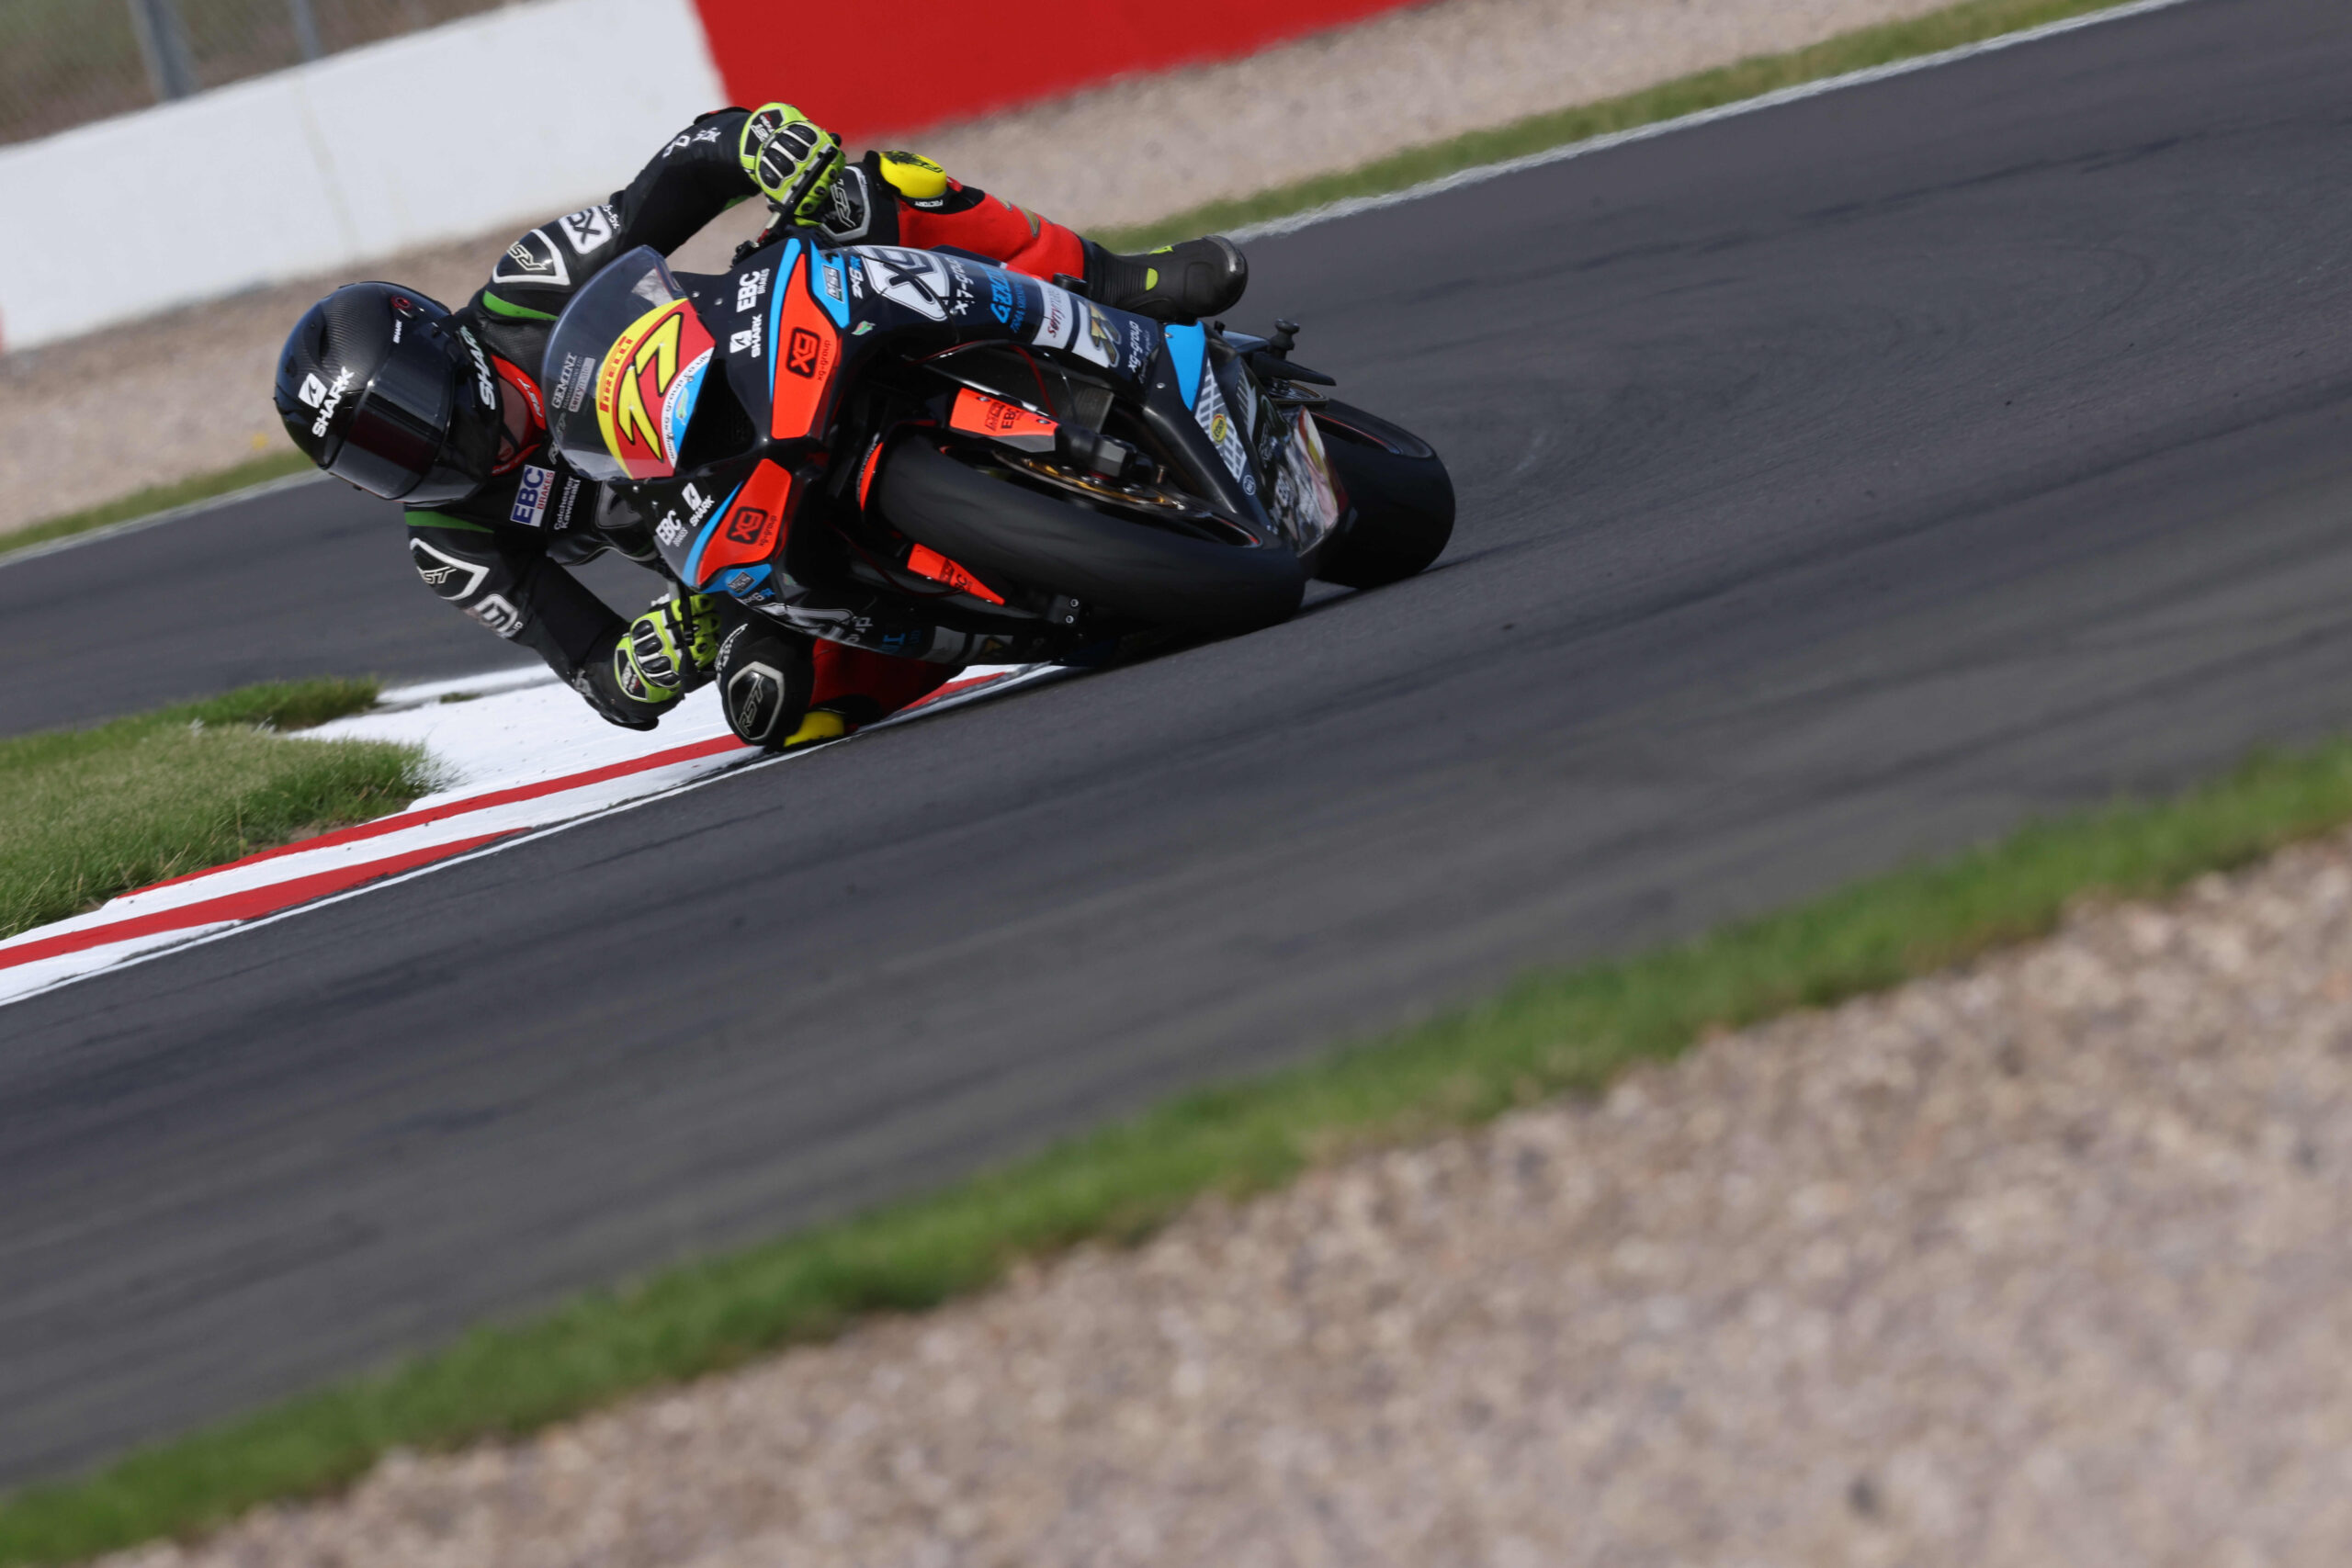 KADE VERWEY HAPPY WITH RACE-LEADING PACE AT DONINGTON PARK